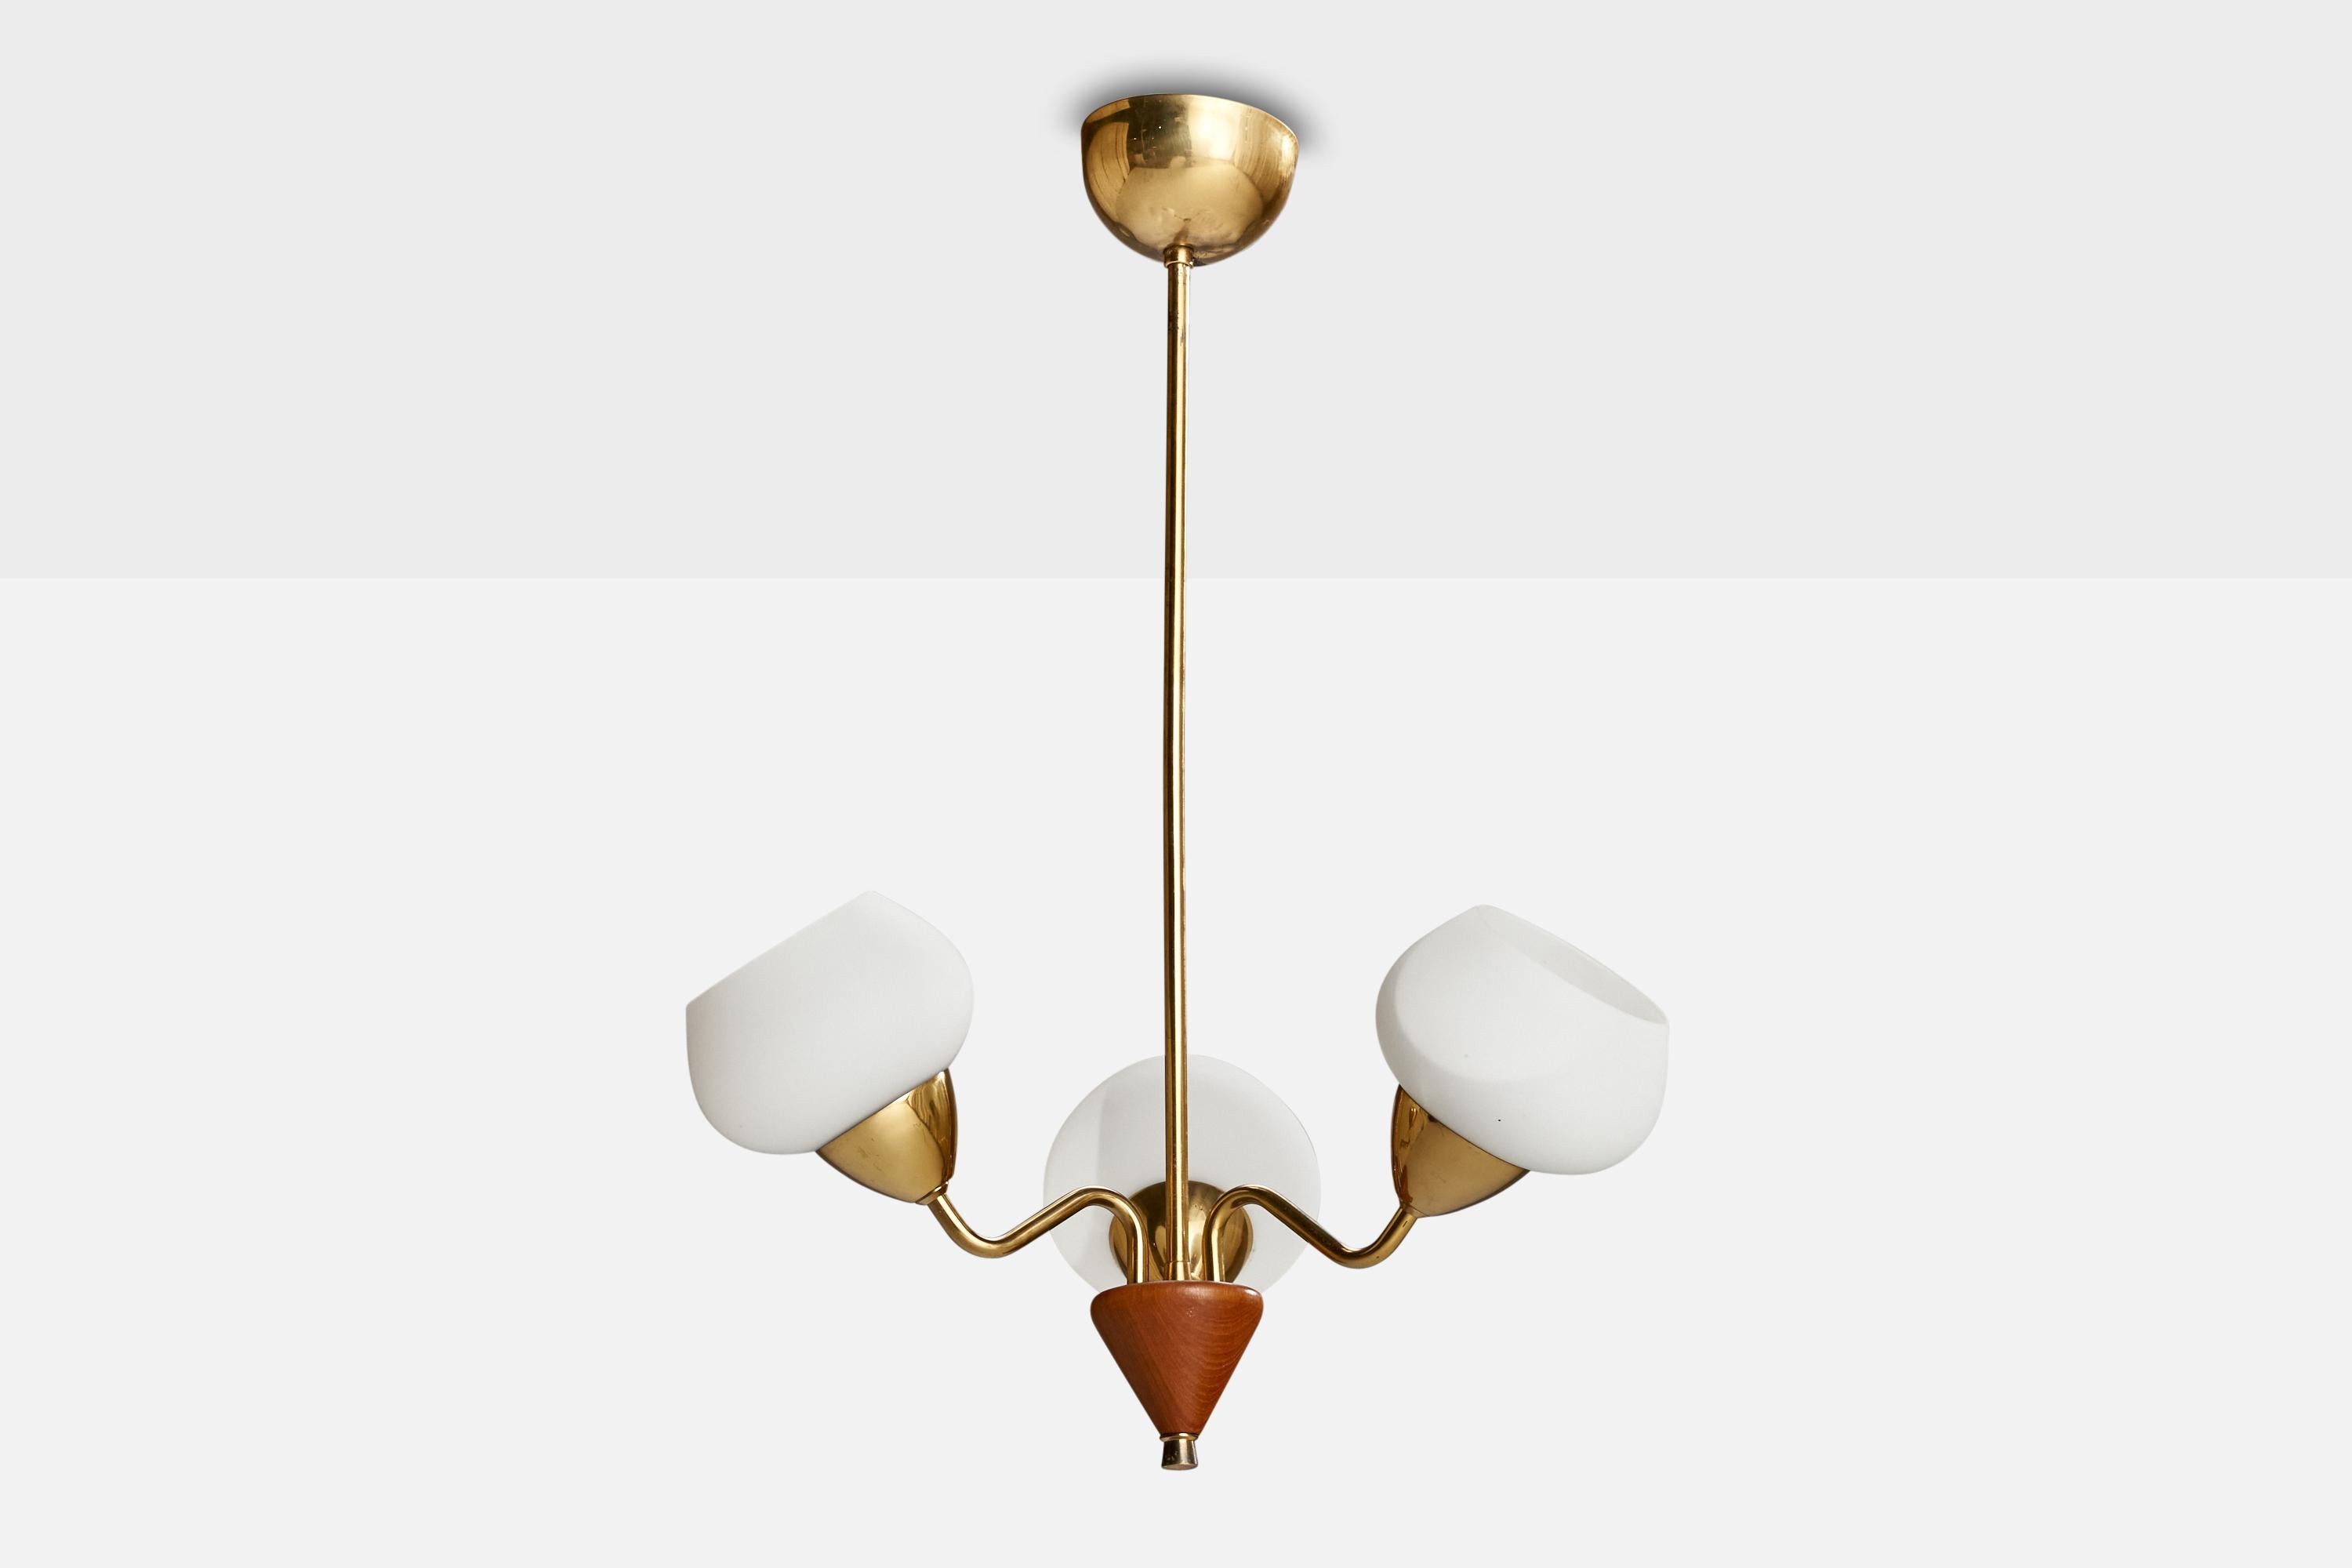 A brass, oak and opaline glass chandelier designed and produced in Sweden, c. 1950s.

Dimensions of canopy (inches): 2.40” H x 3.88” Diameter
Socket takes standard E-26 bulbs. 3 socket.There is no maximum wattage stated on the fixture. All lighting